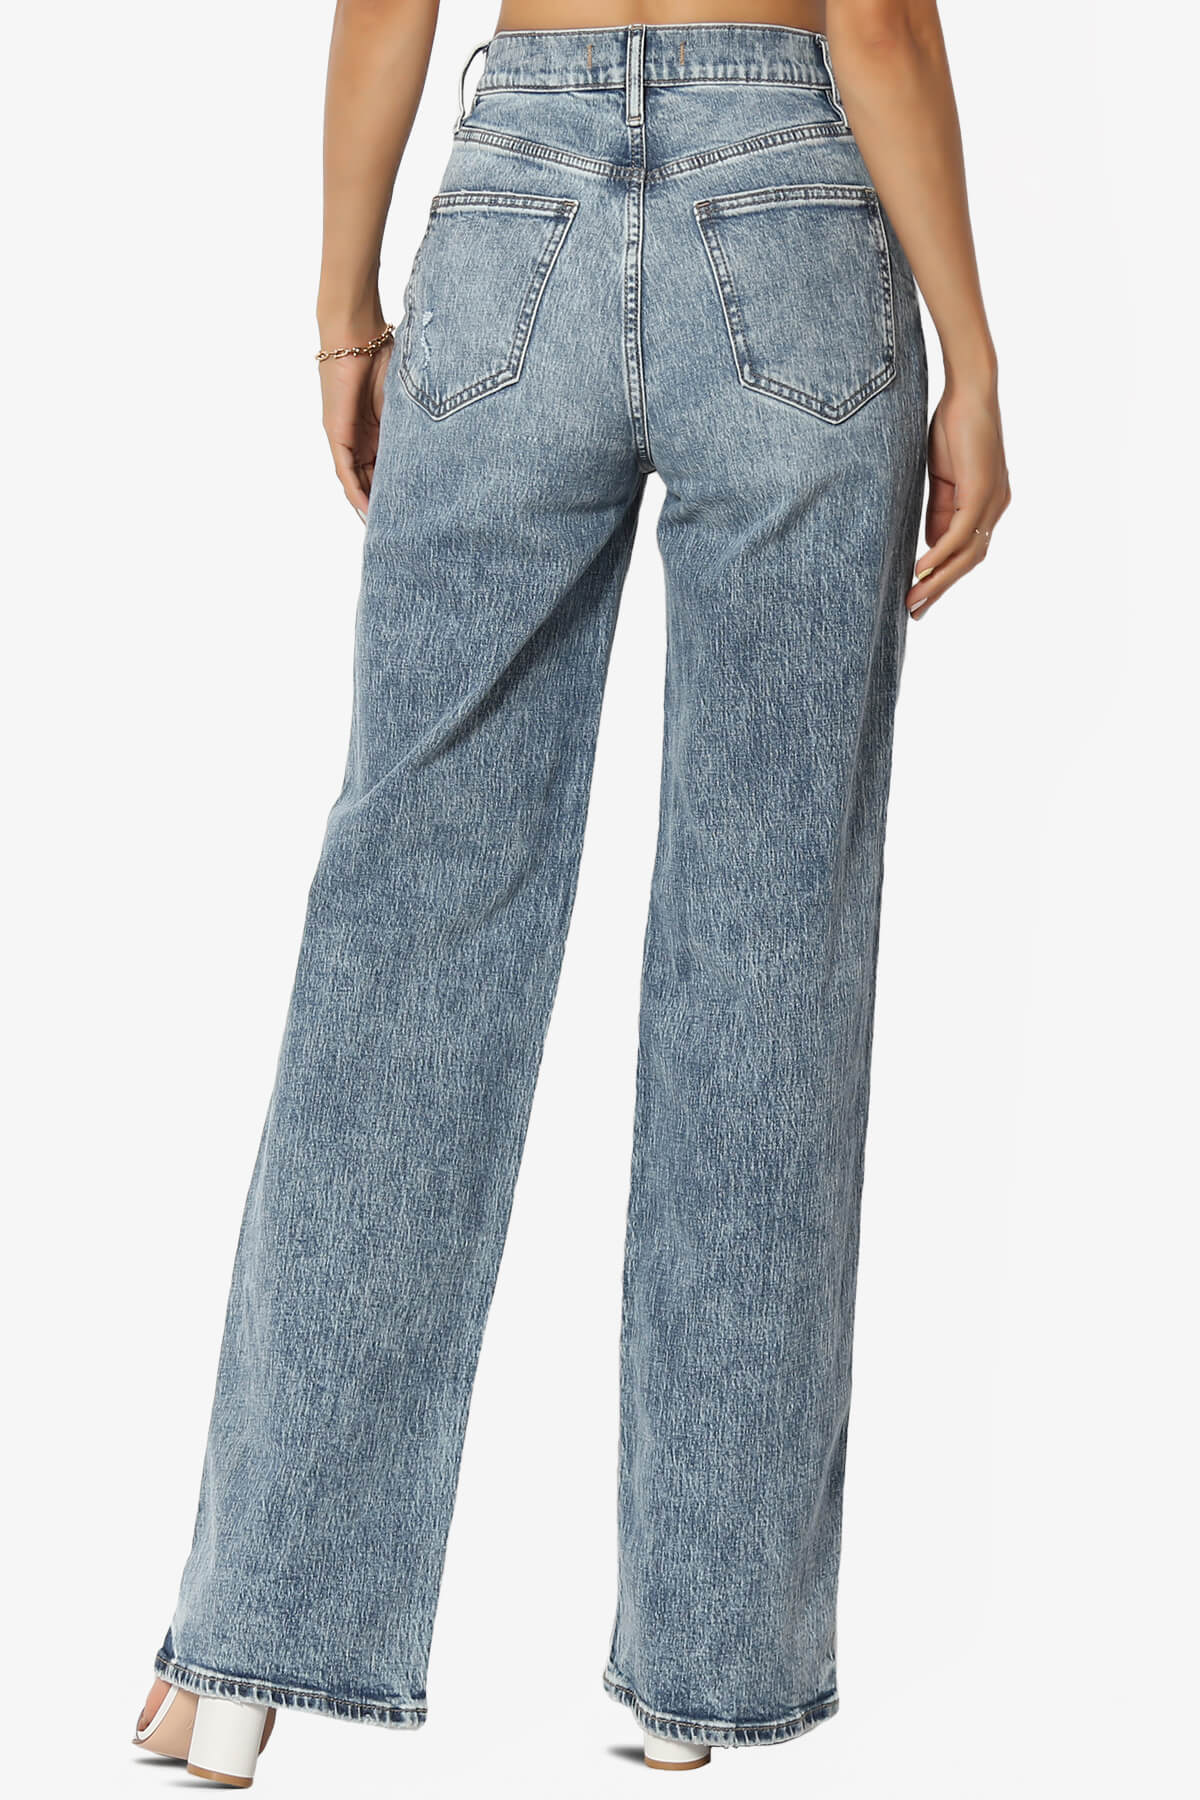 Ryder Ultra High Rise Baggy Jeans in Undenble MEDIUM_2